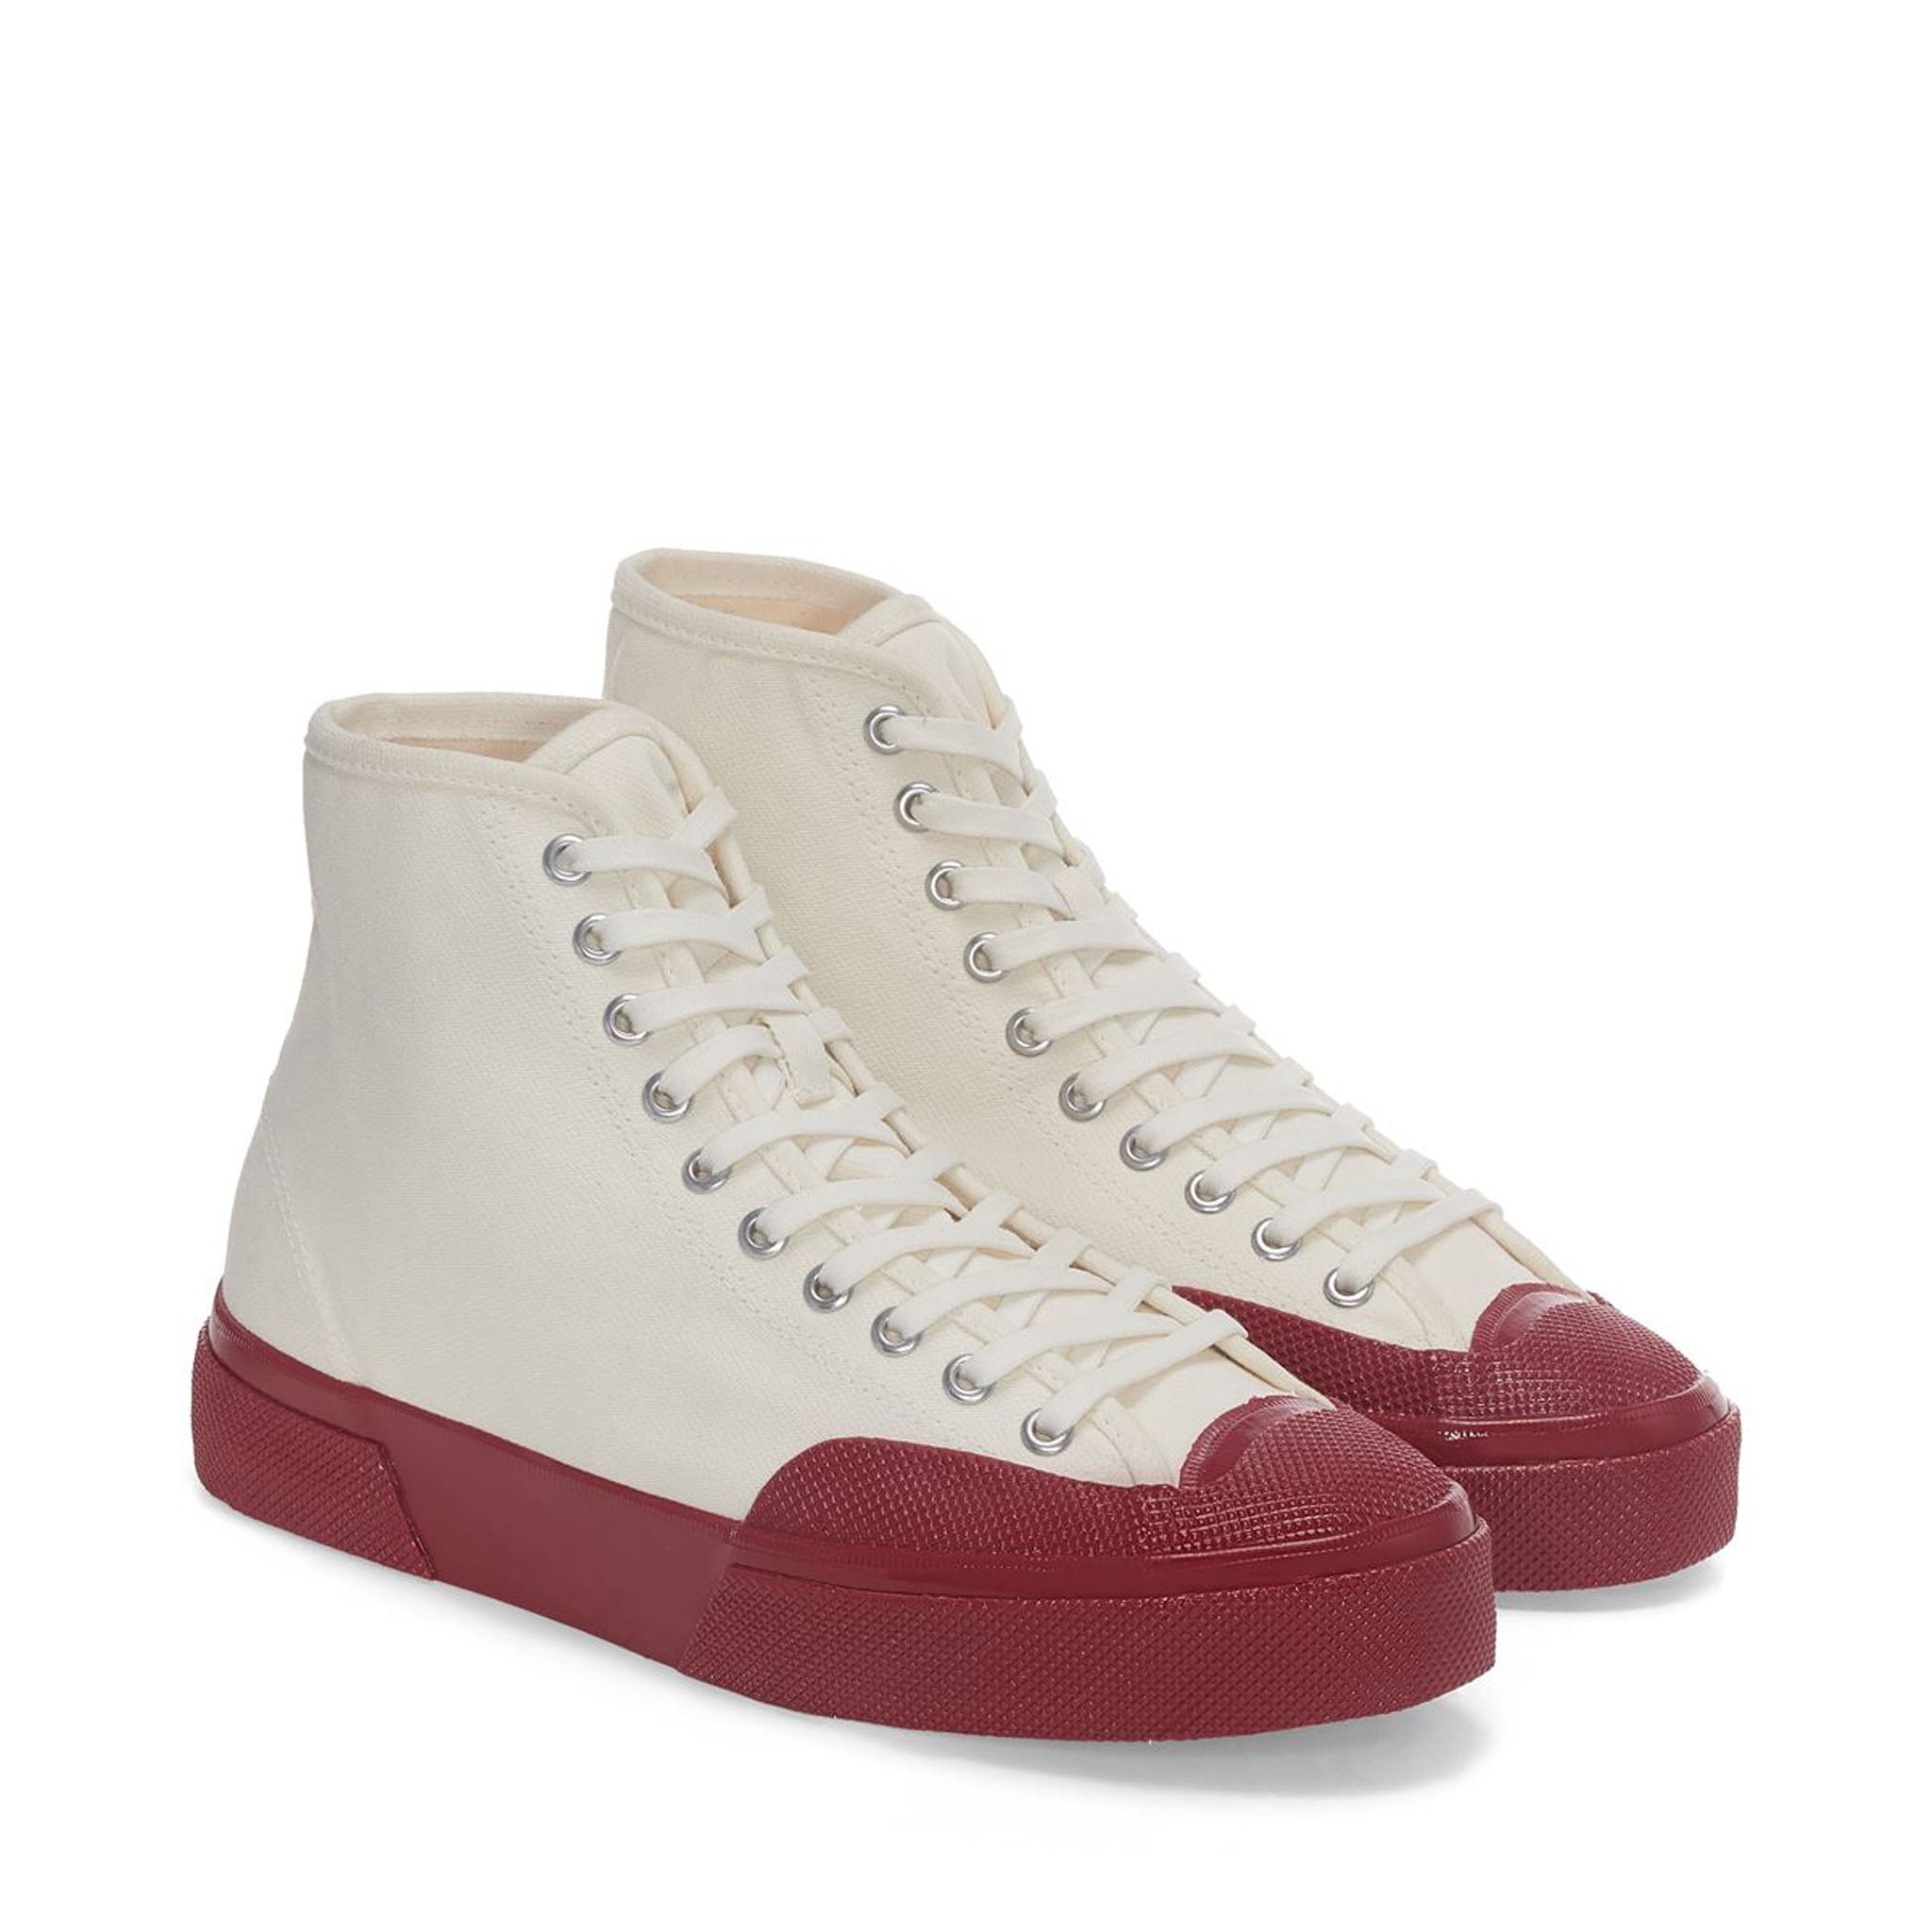 Superga 2433 Collect Workwear Sneakers - White / Red. Front view.